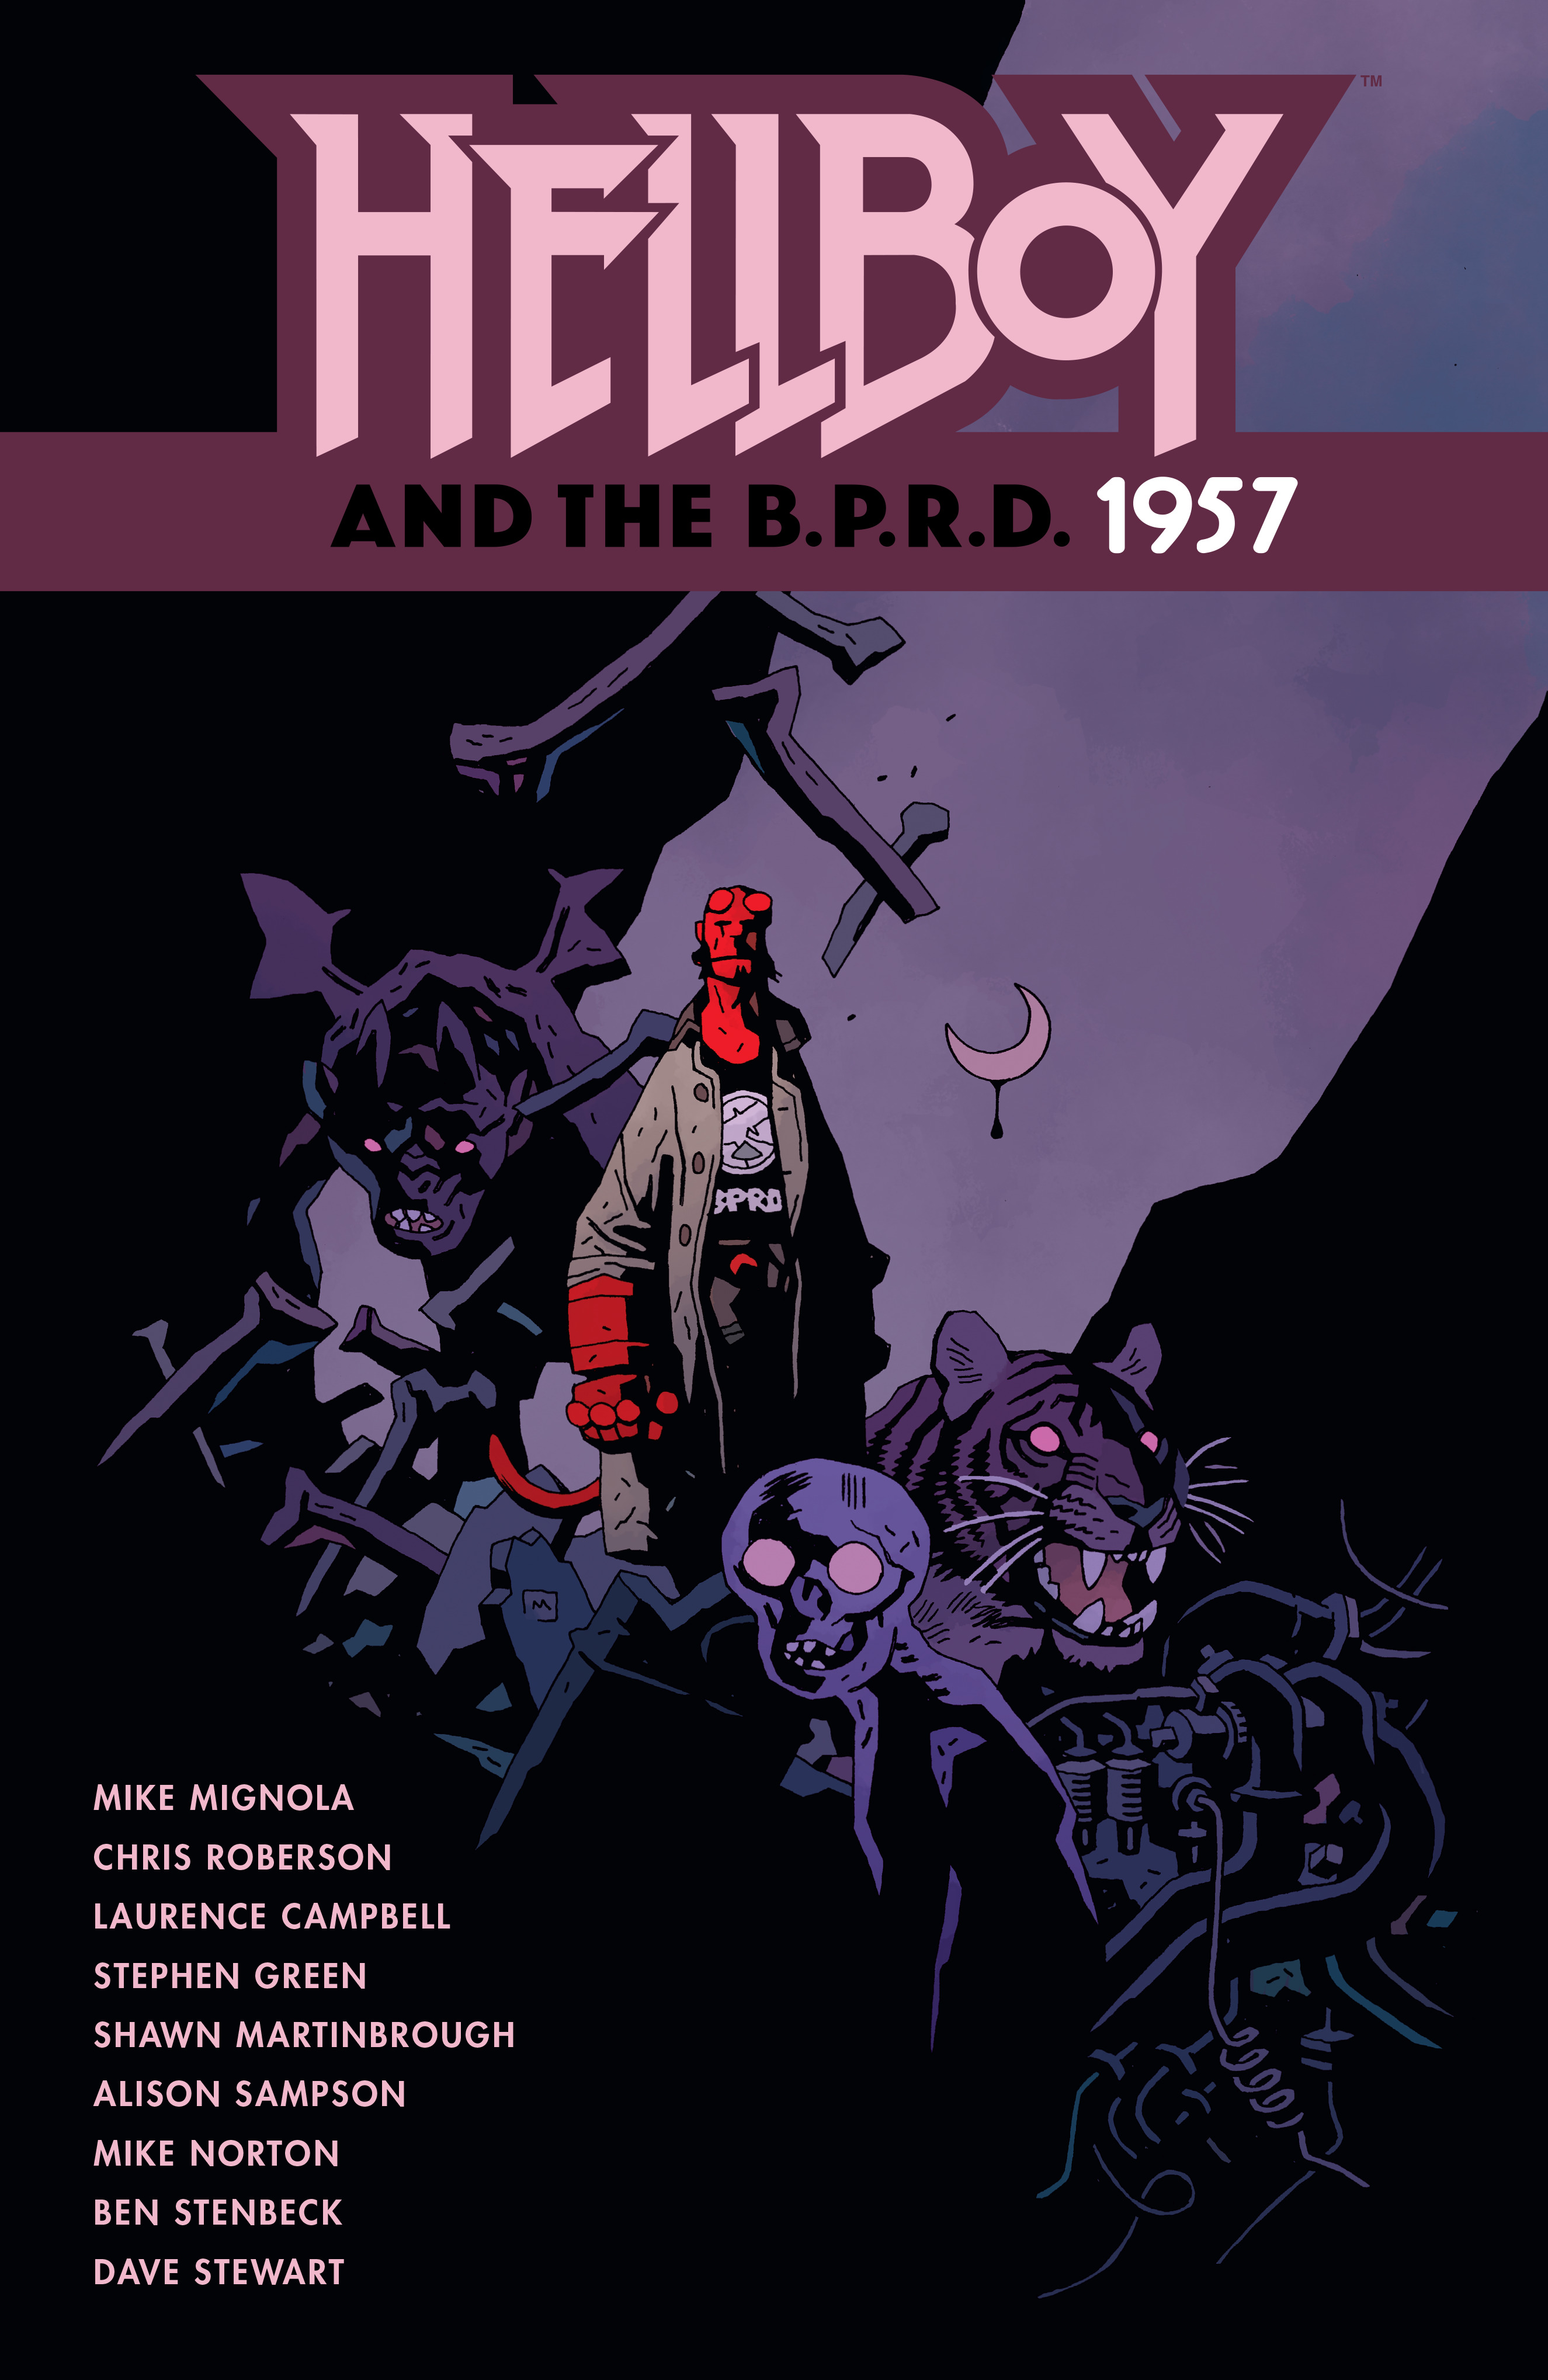 Hellboy and the B.P.R.D. - 1957 | Mignola, Mike